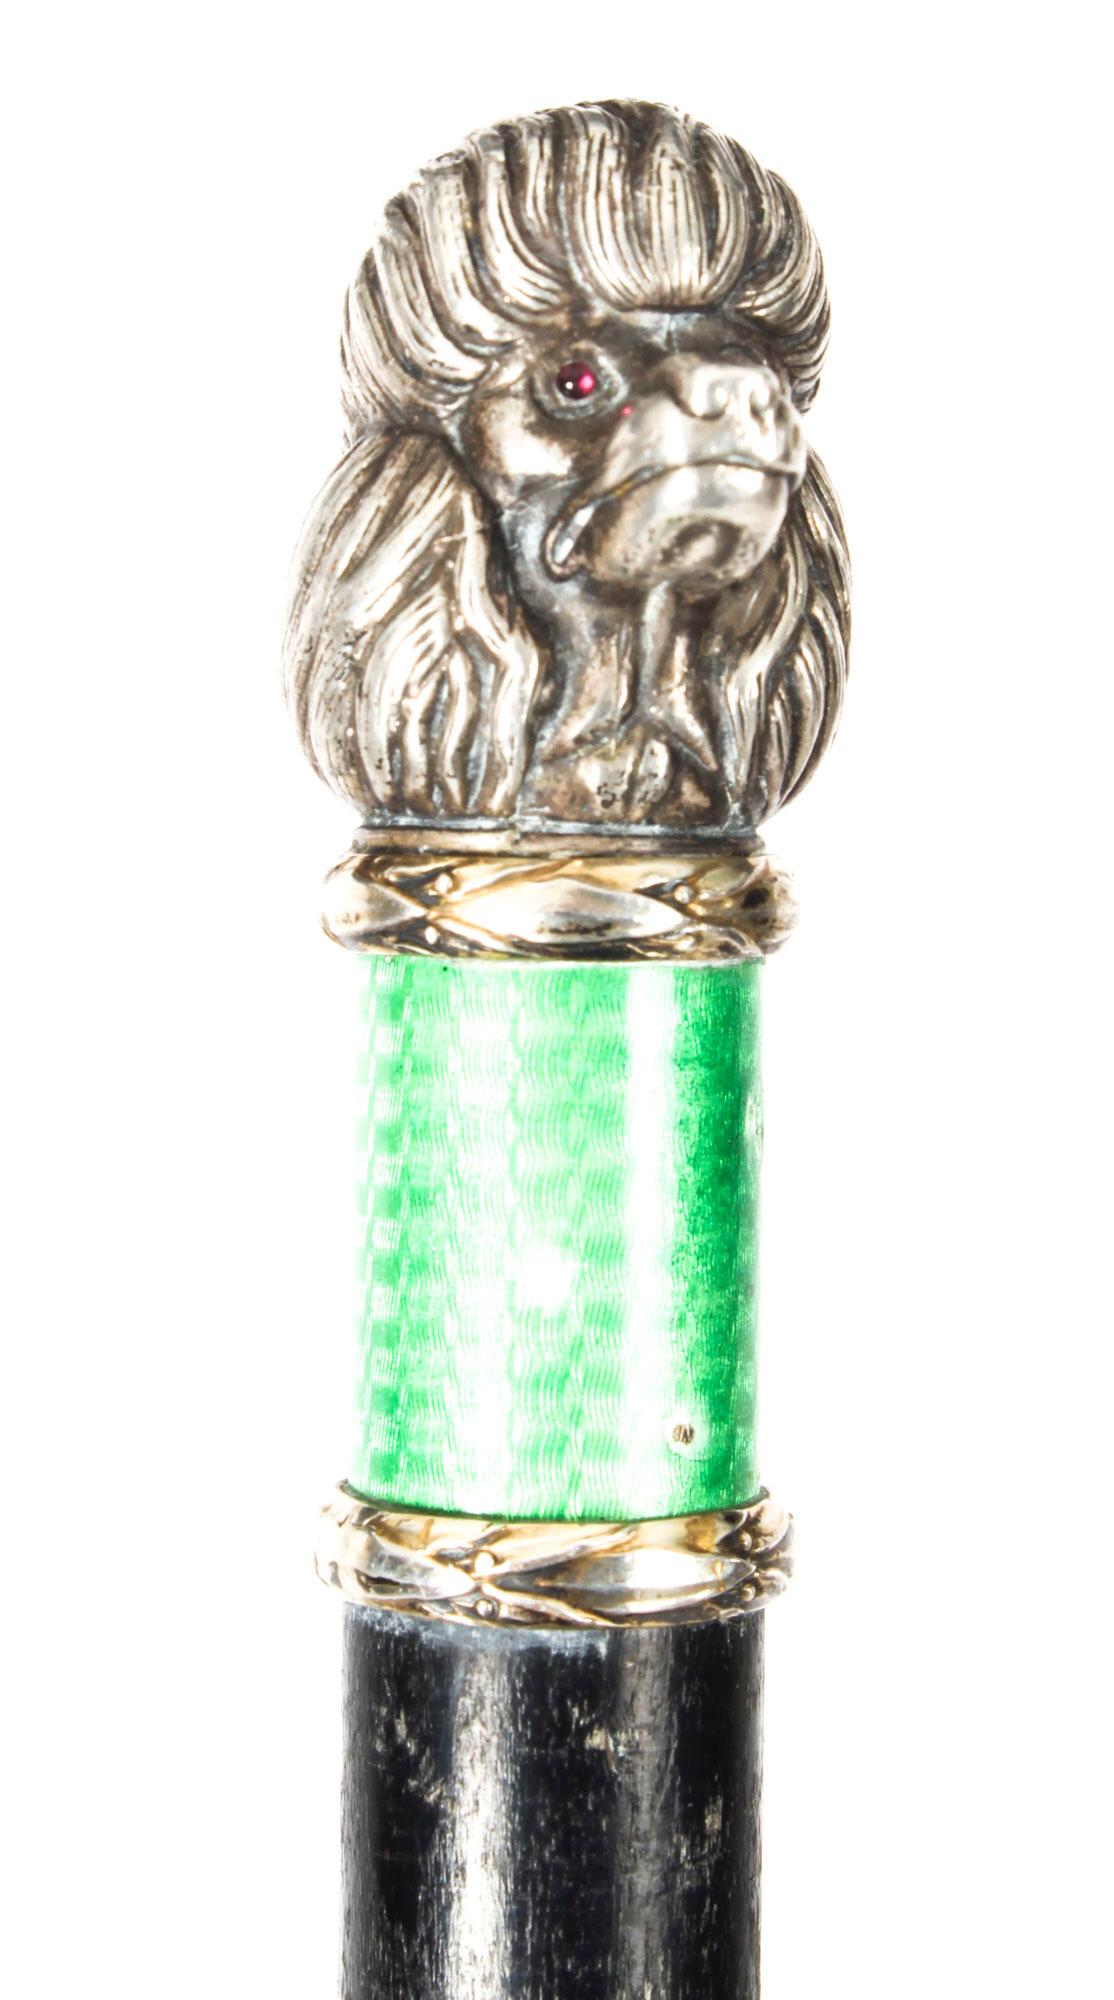 This beautiful antique Russian silver and enamel mounted walking stick is circa 1880 in date.

It features a decorative handle in the form of a poodle dog's head, with glass eyes above laurel leaf borders and a stunning band of green guilloche